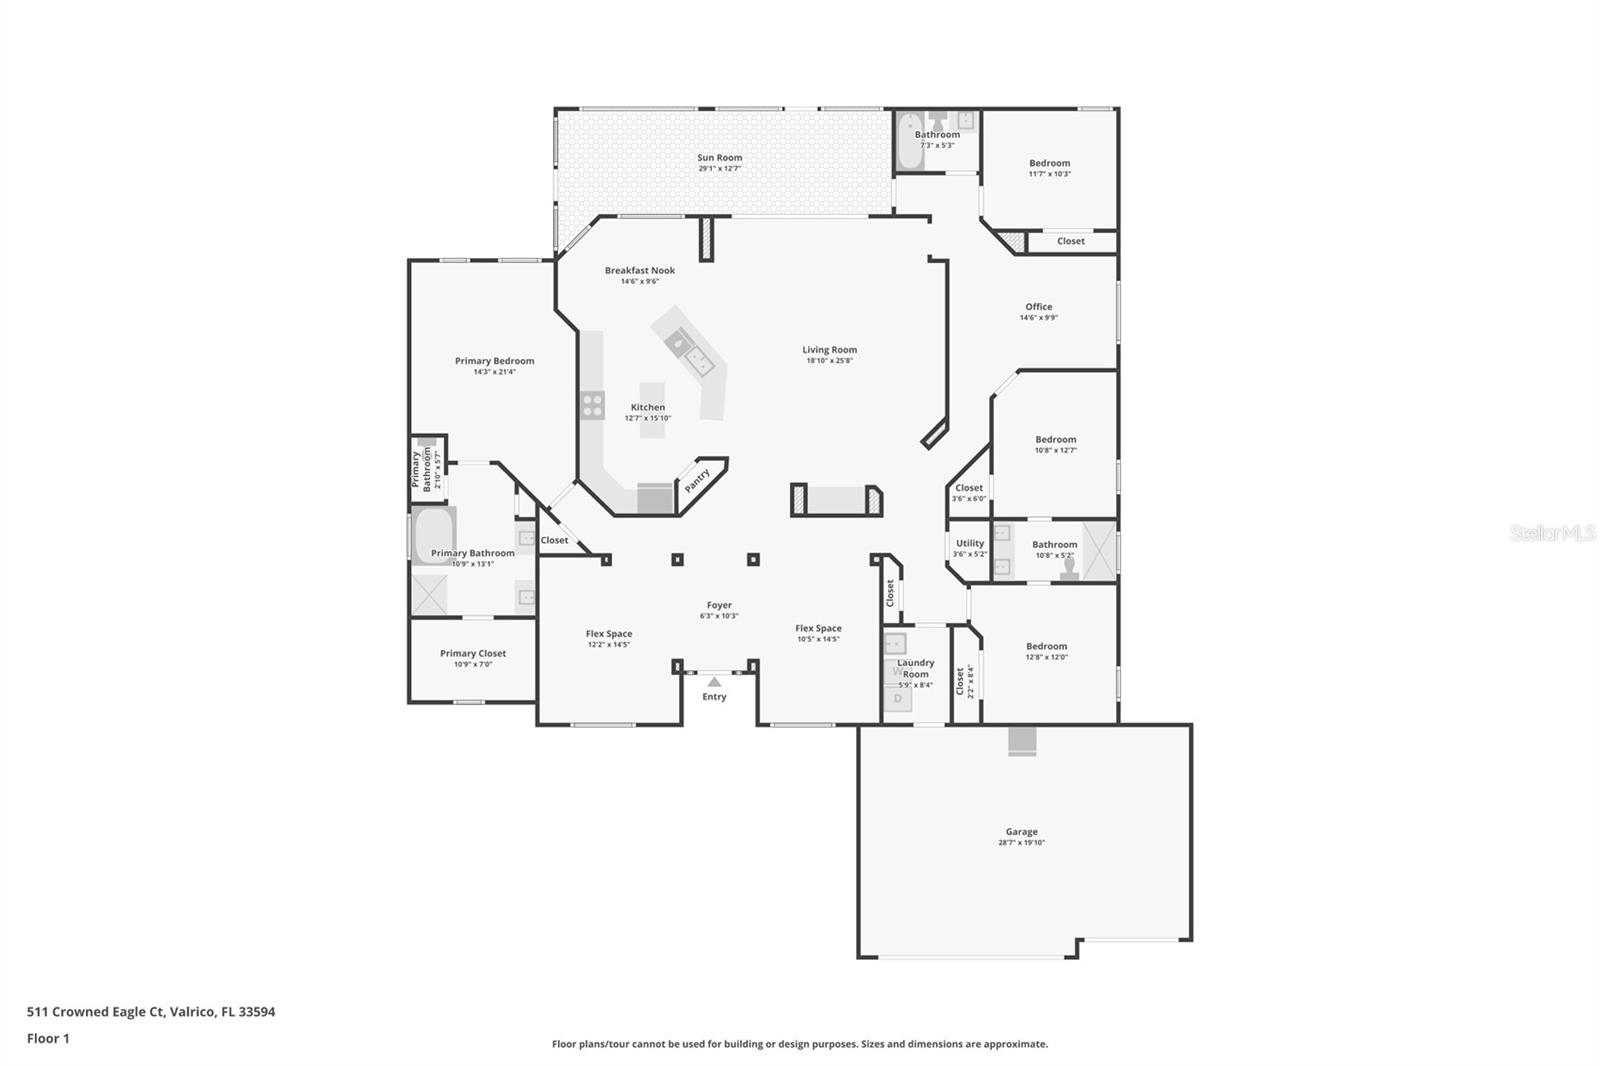 Try the video link for an interactive floor plan.